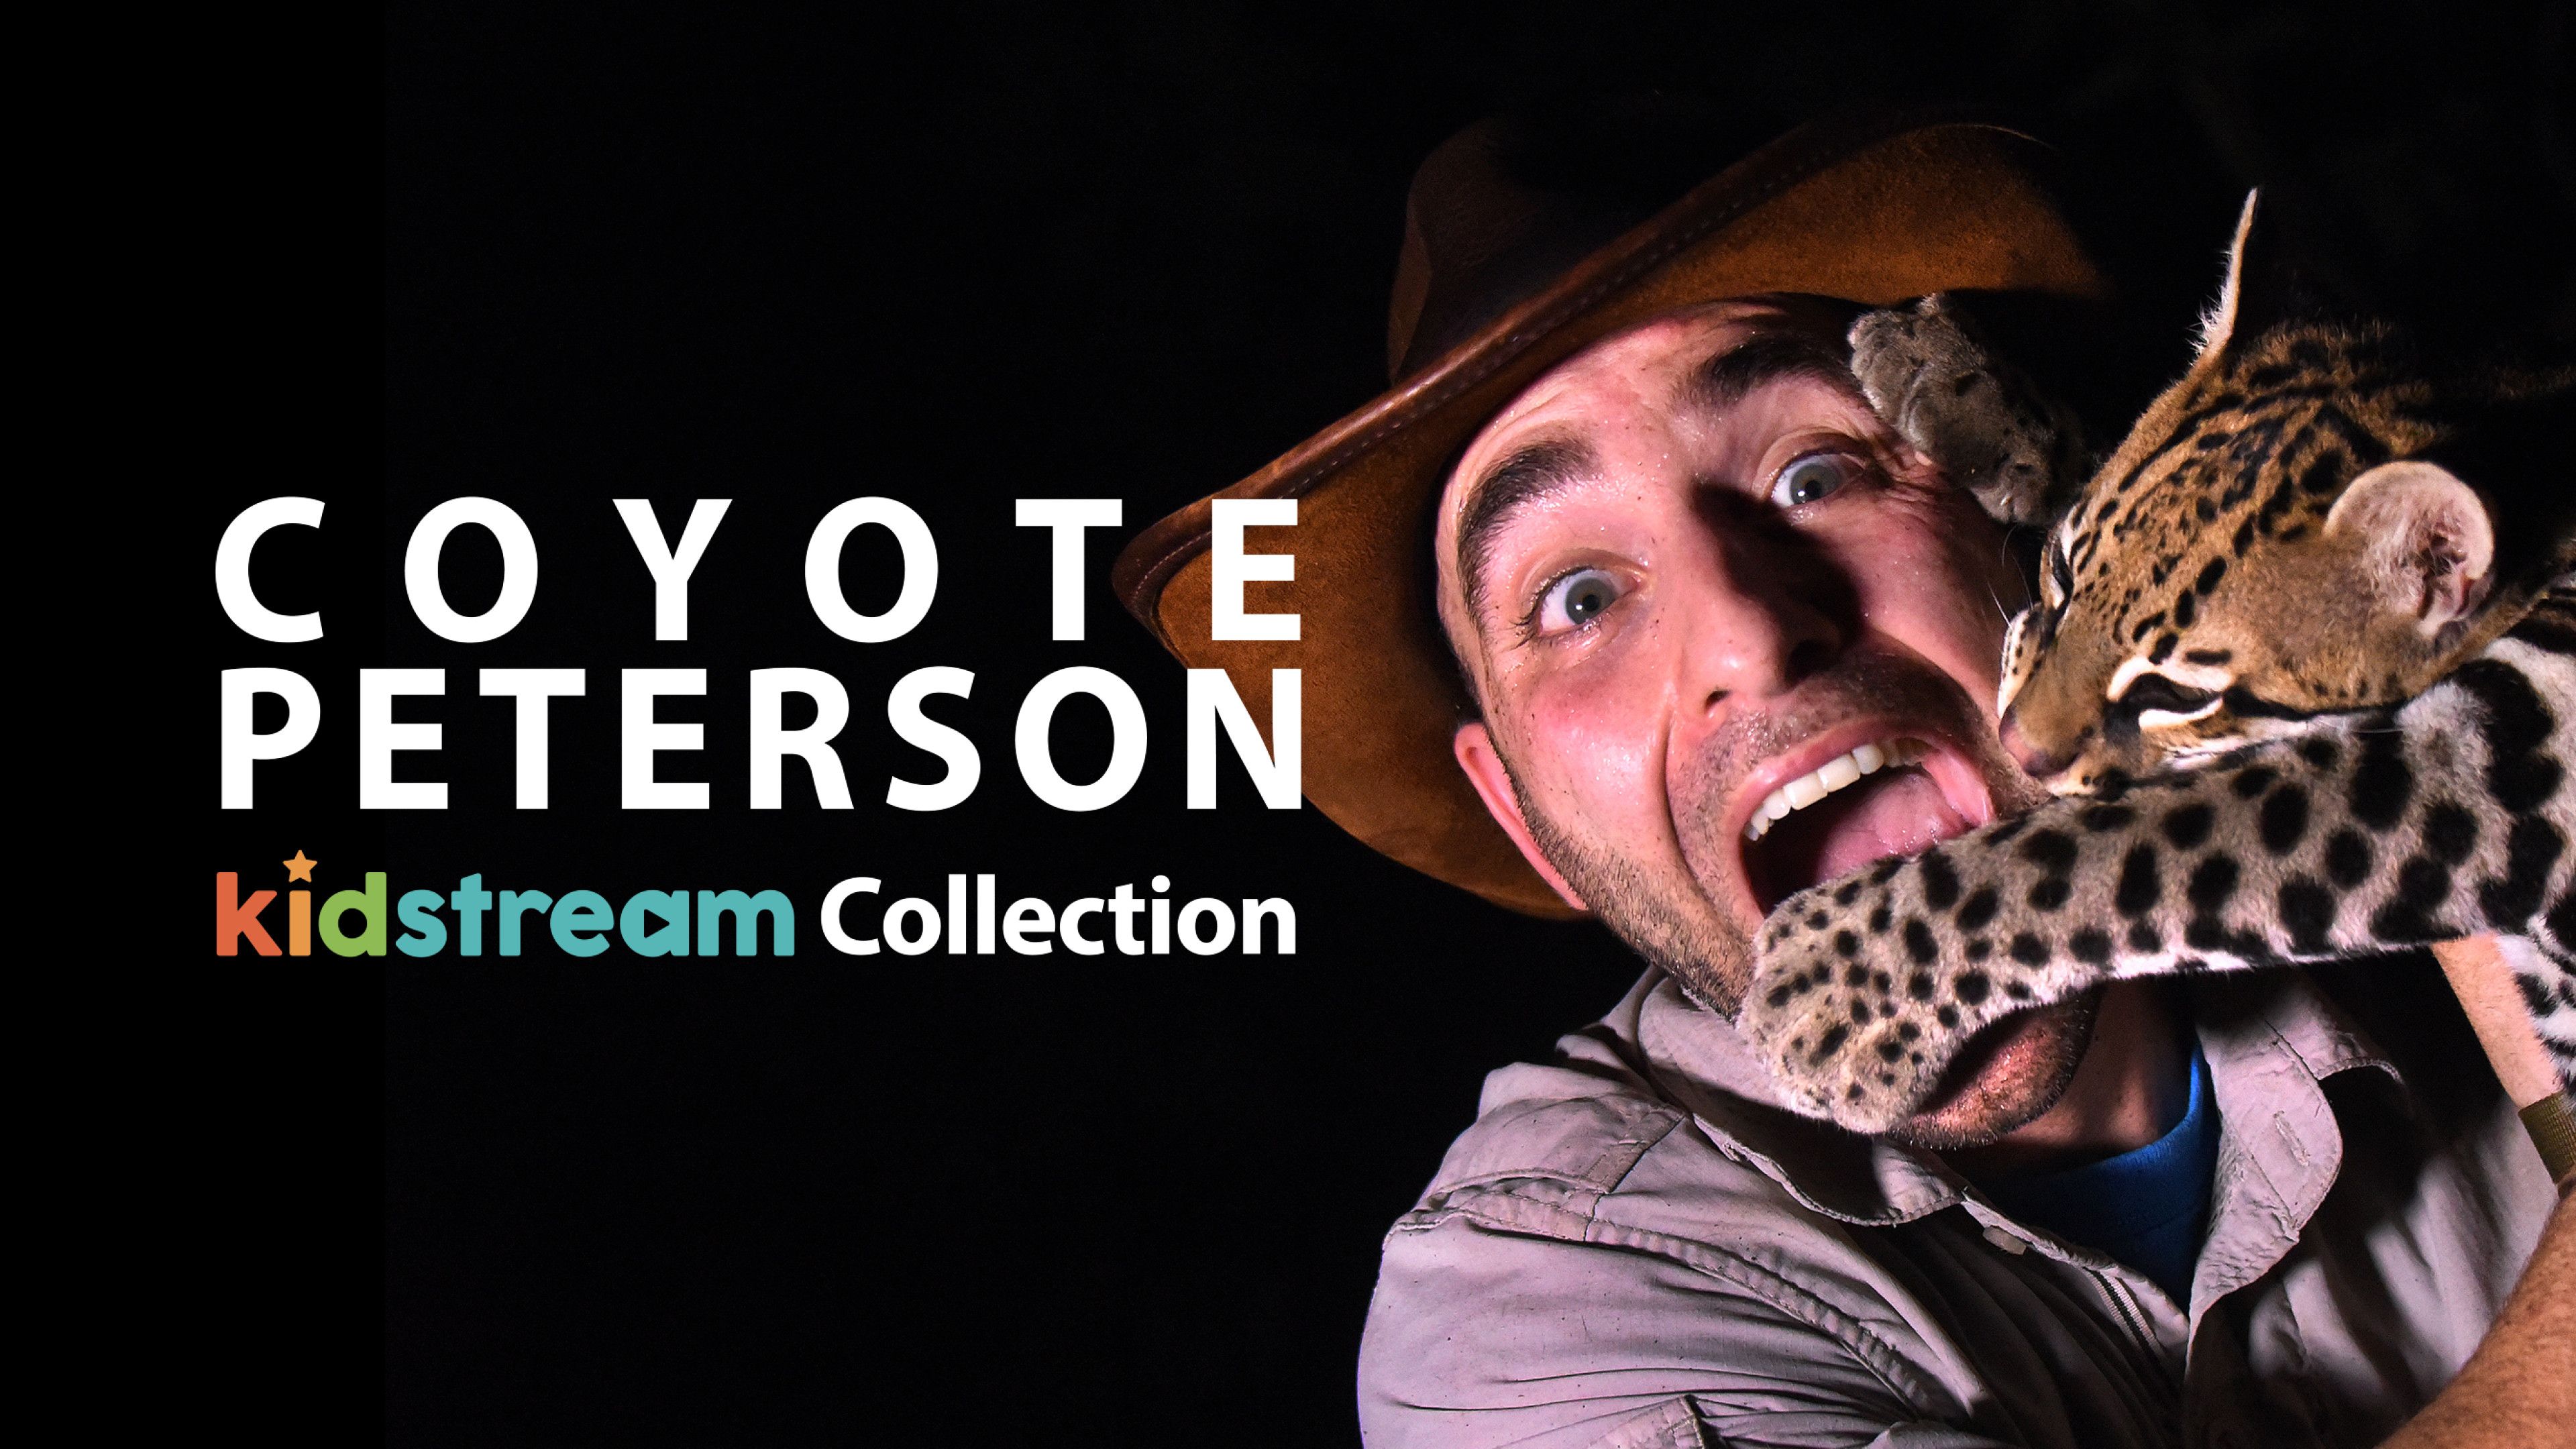 Coyote Peterson's Kidstream Collection